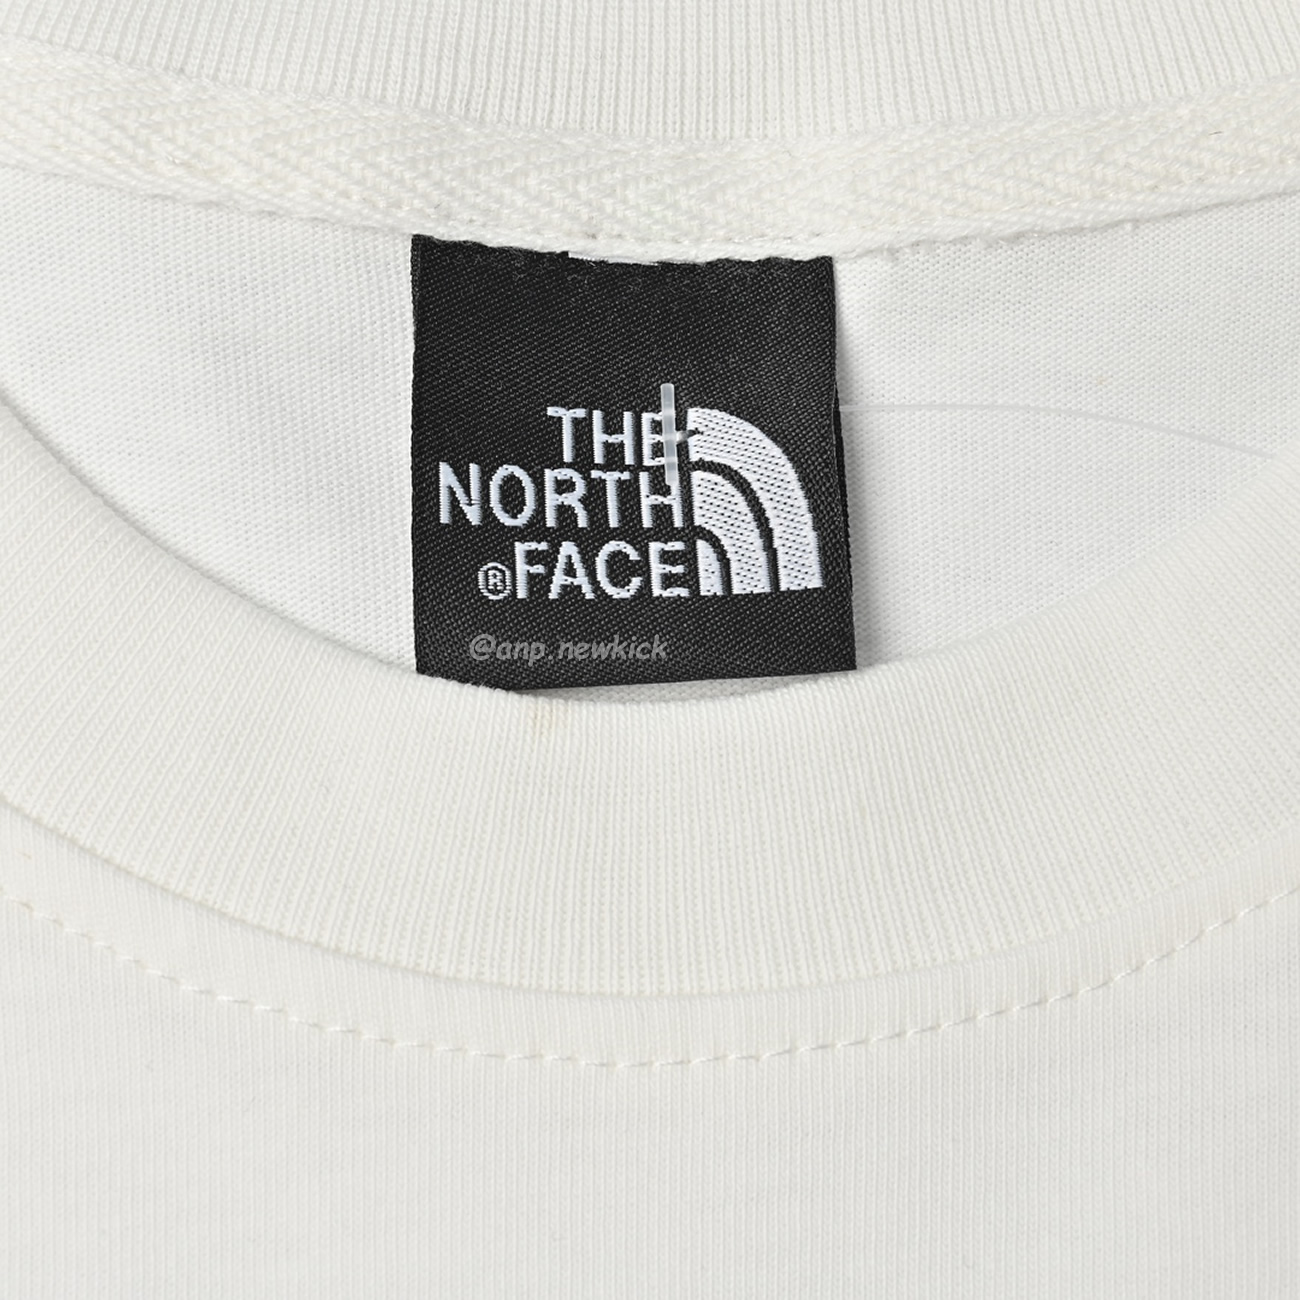 The North Face Tnf 3d The Pinnacle Of Printed Hoodies, Patterned Short Sleeves T Shirt (6) - newkick.org